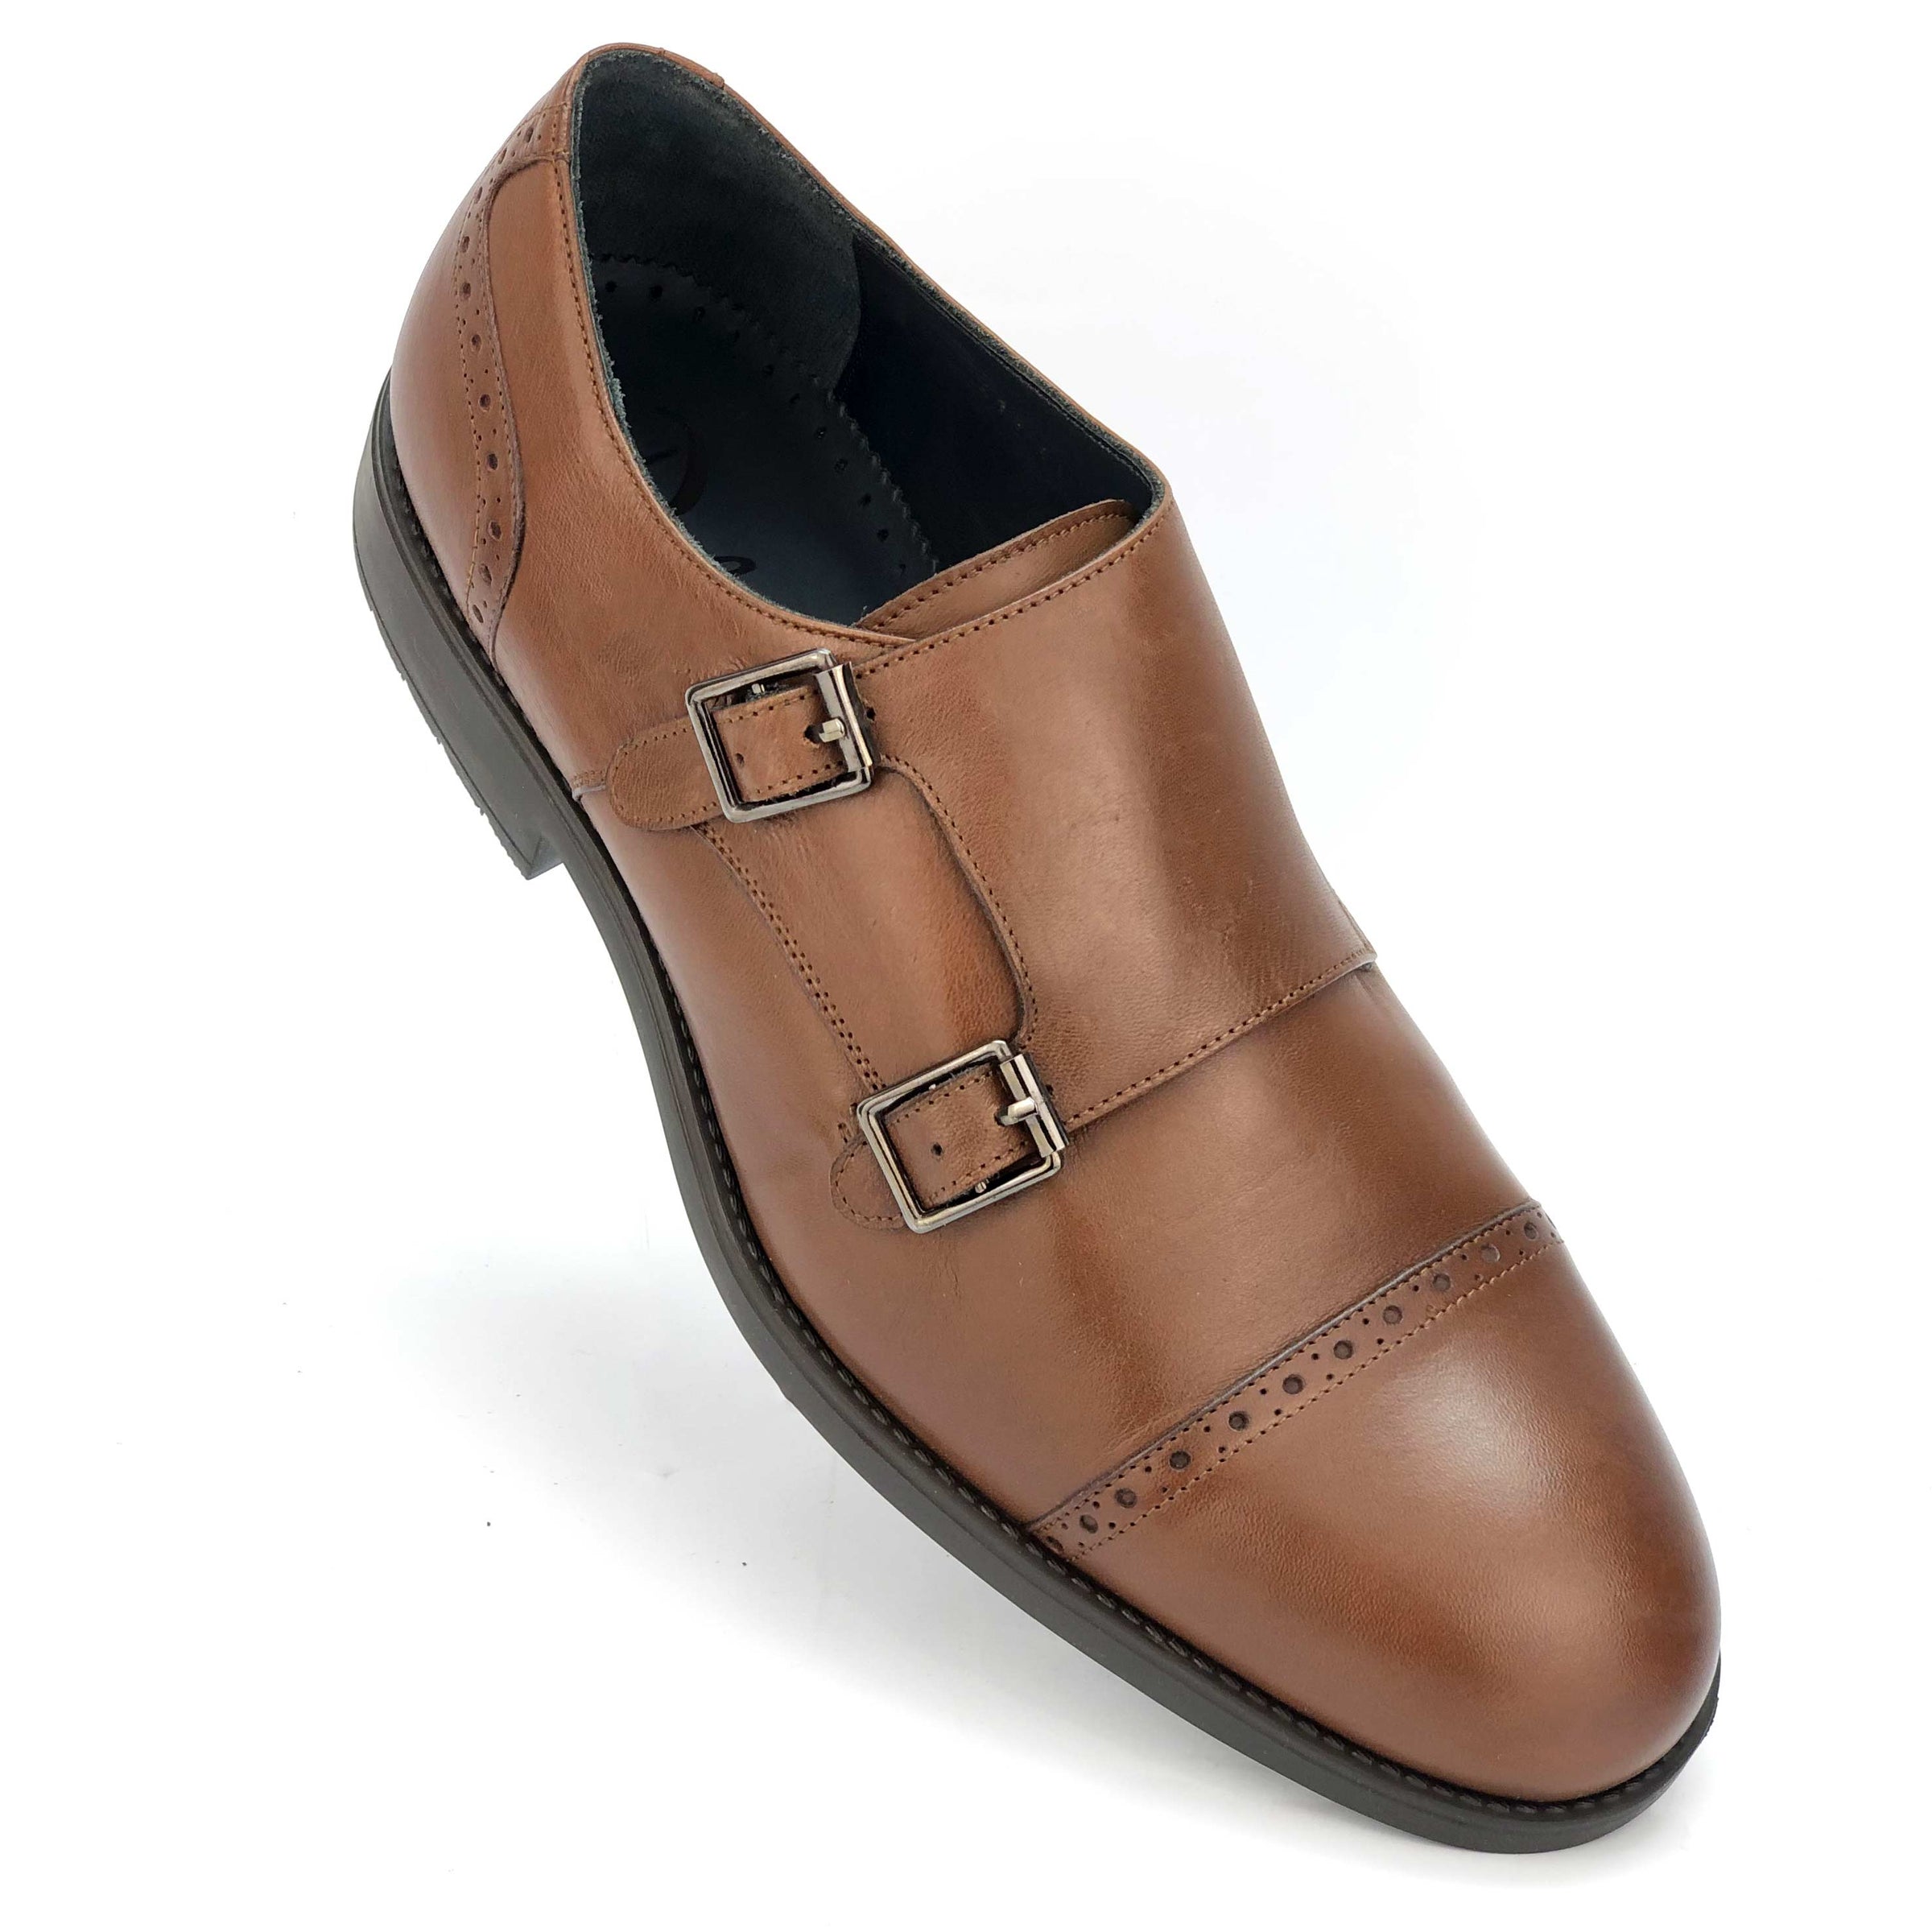 CH411-019  - Chaussure Cuir TABAC - deluxe-maroc